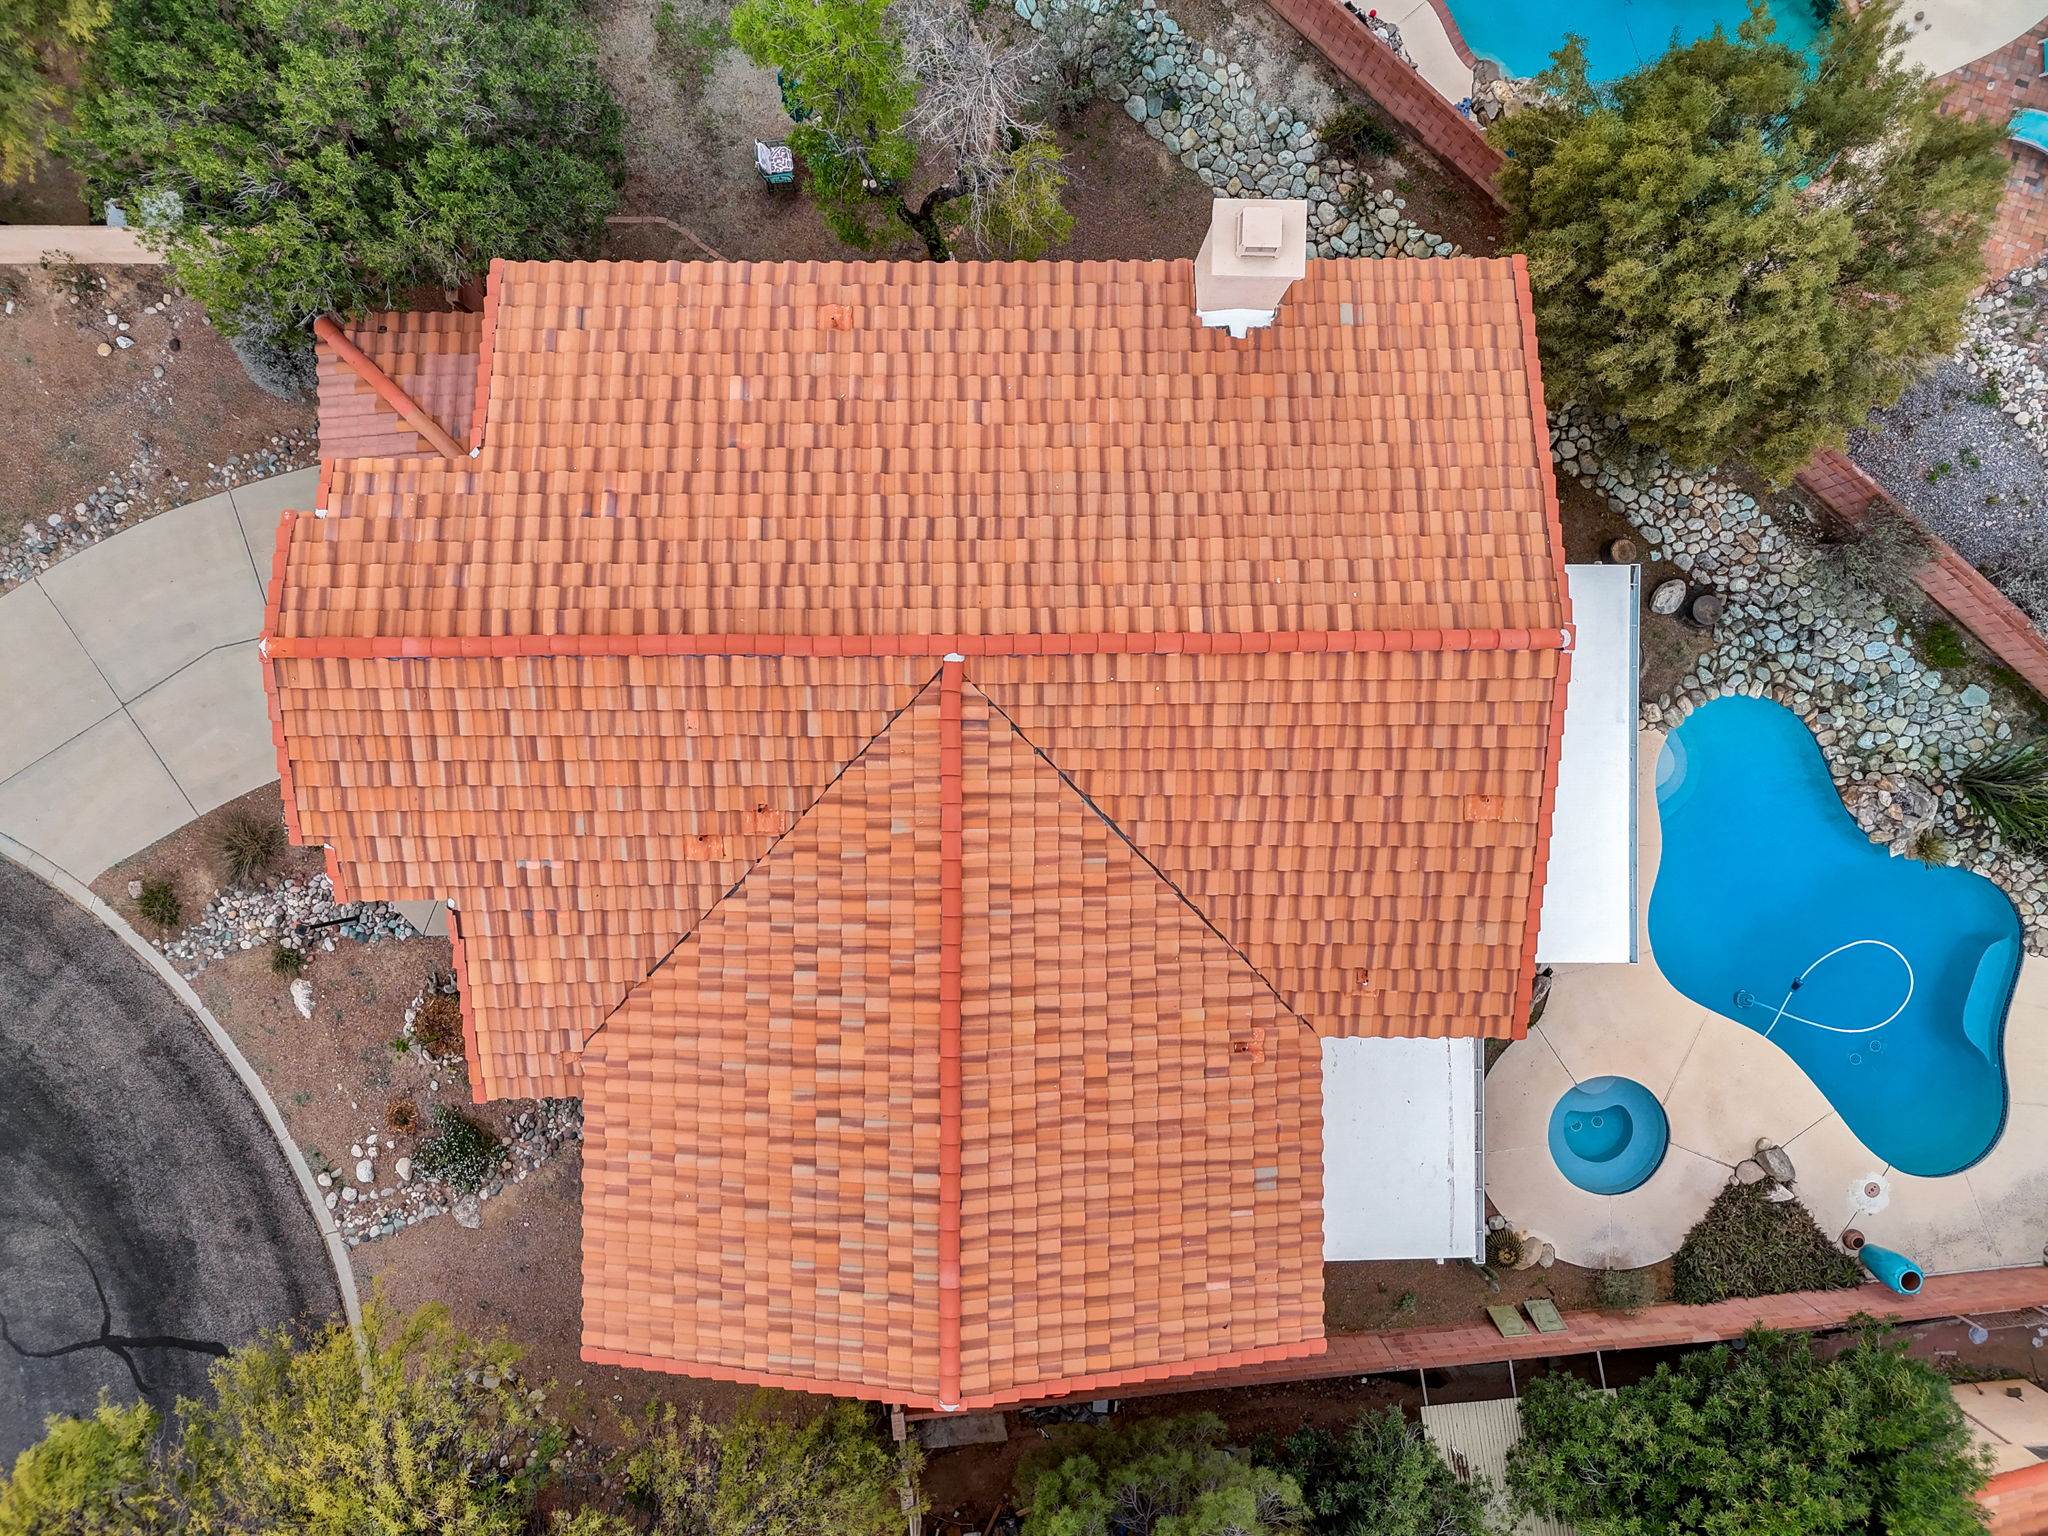 Drone view of roof and backyard